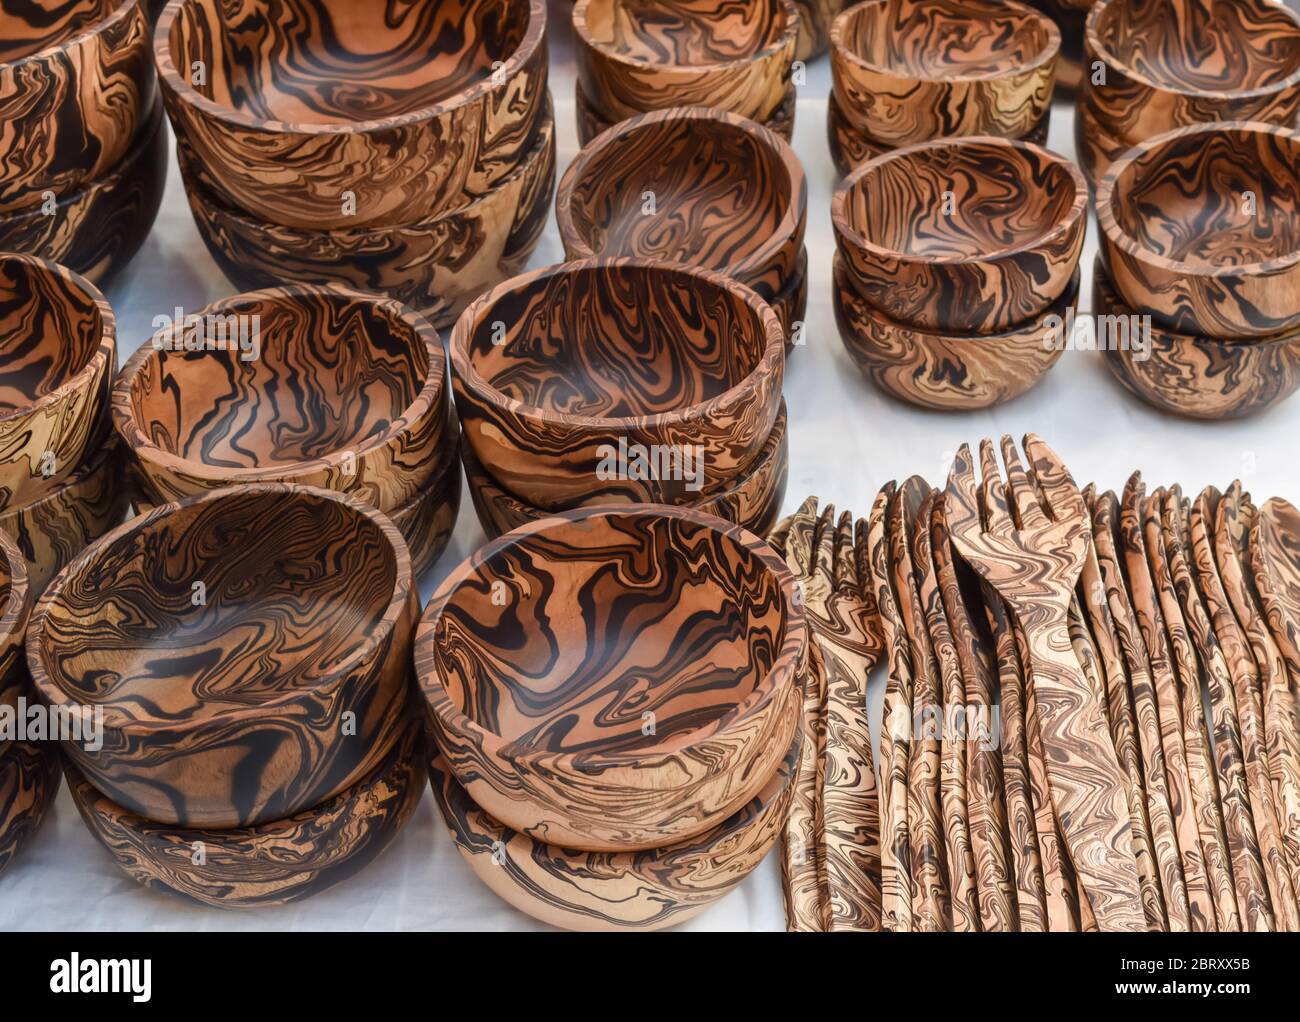 Wood products. Utensils made of wooden bowls and spoons. Exhibited for sale Stock Photo